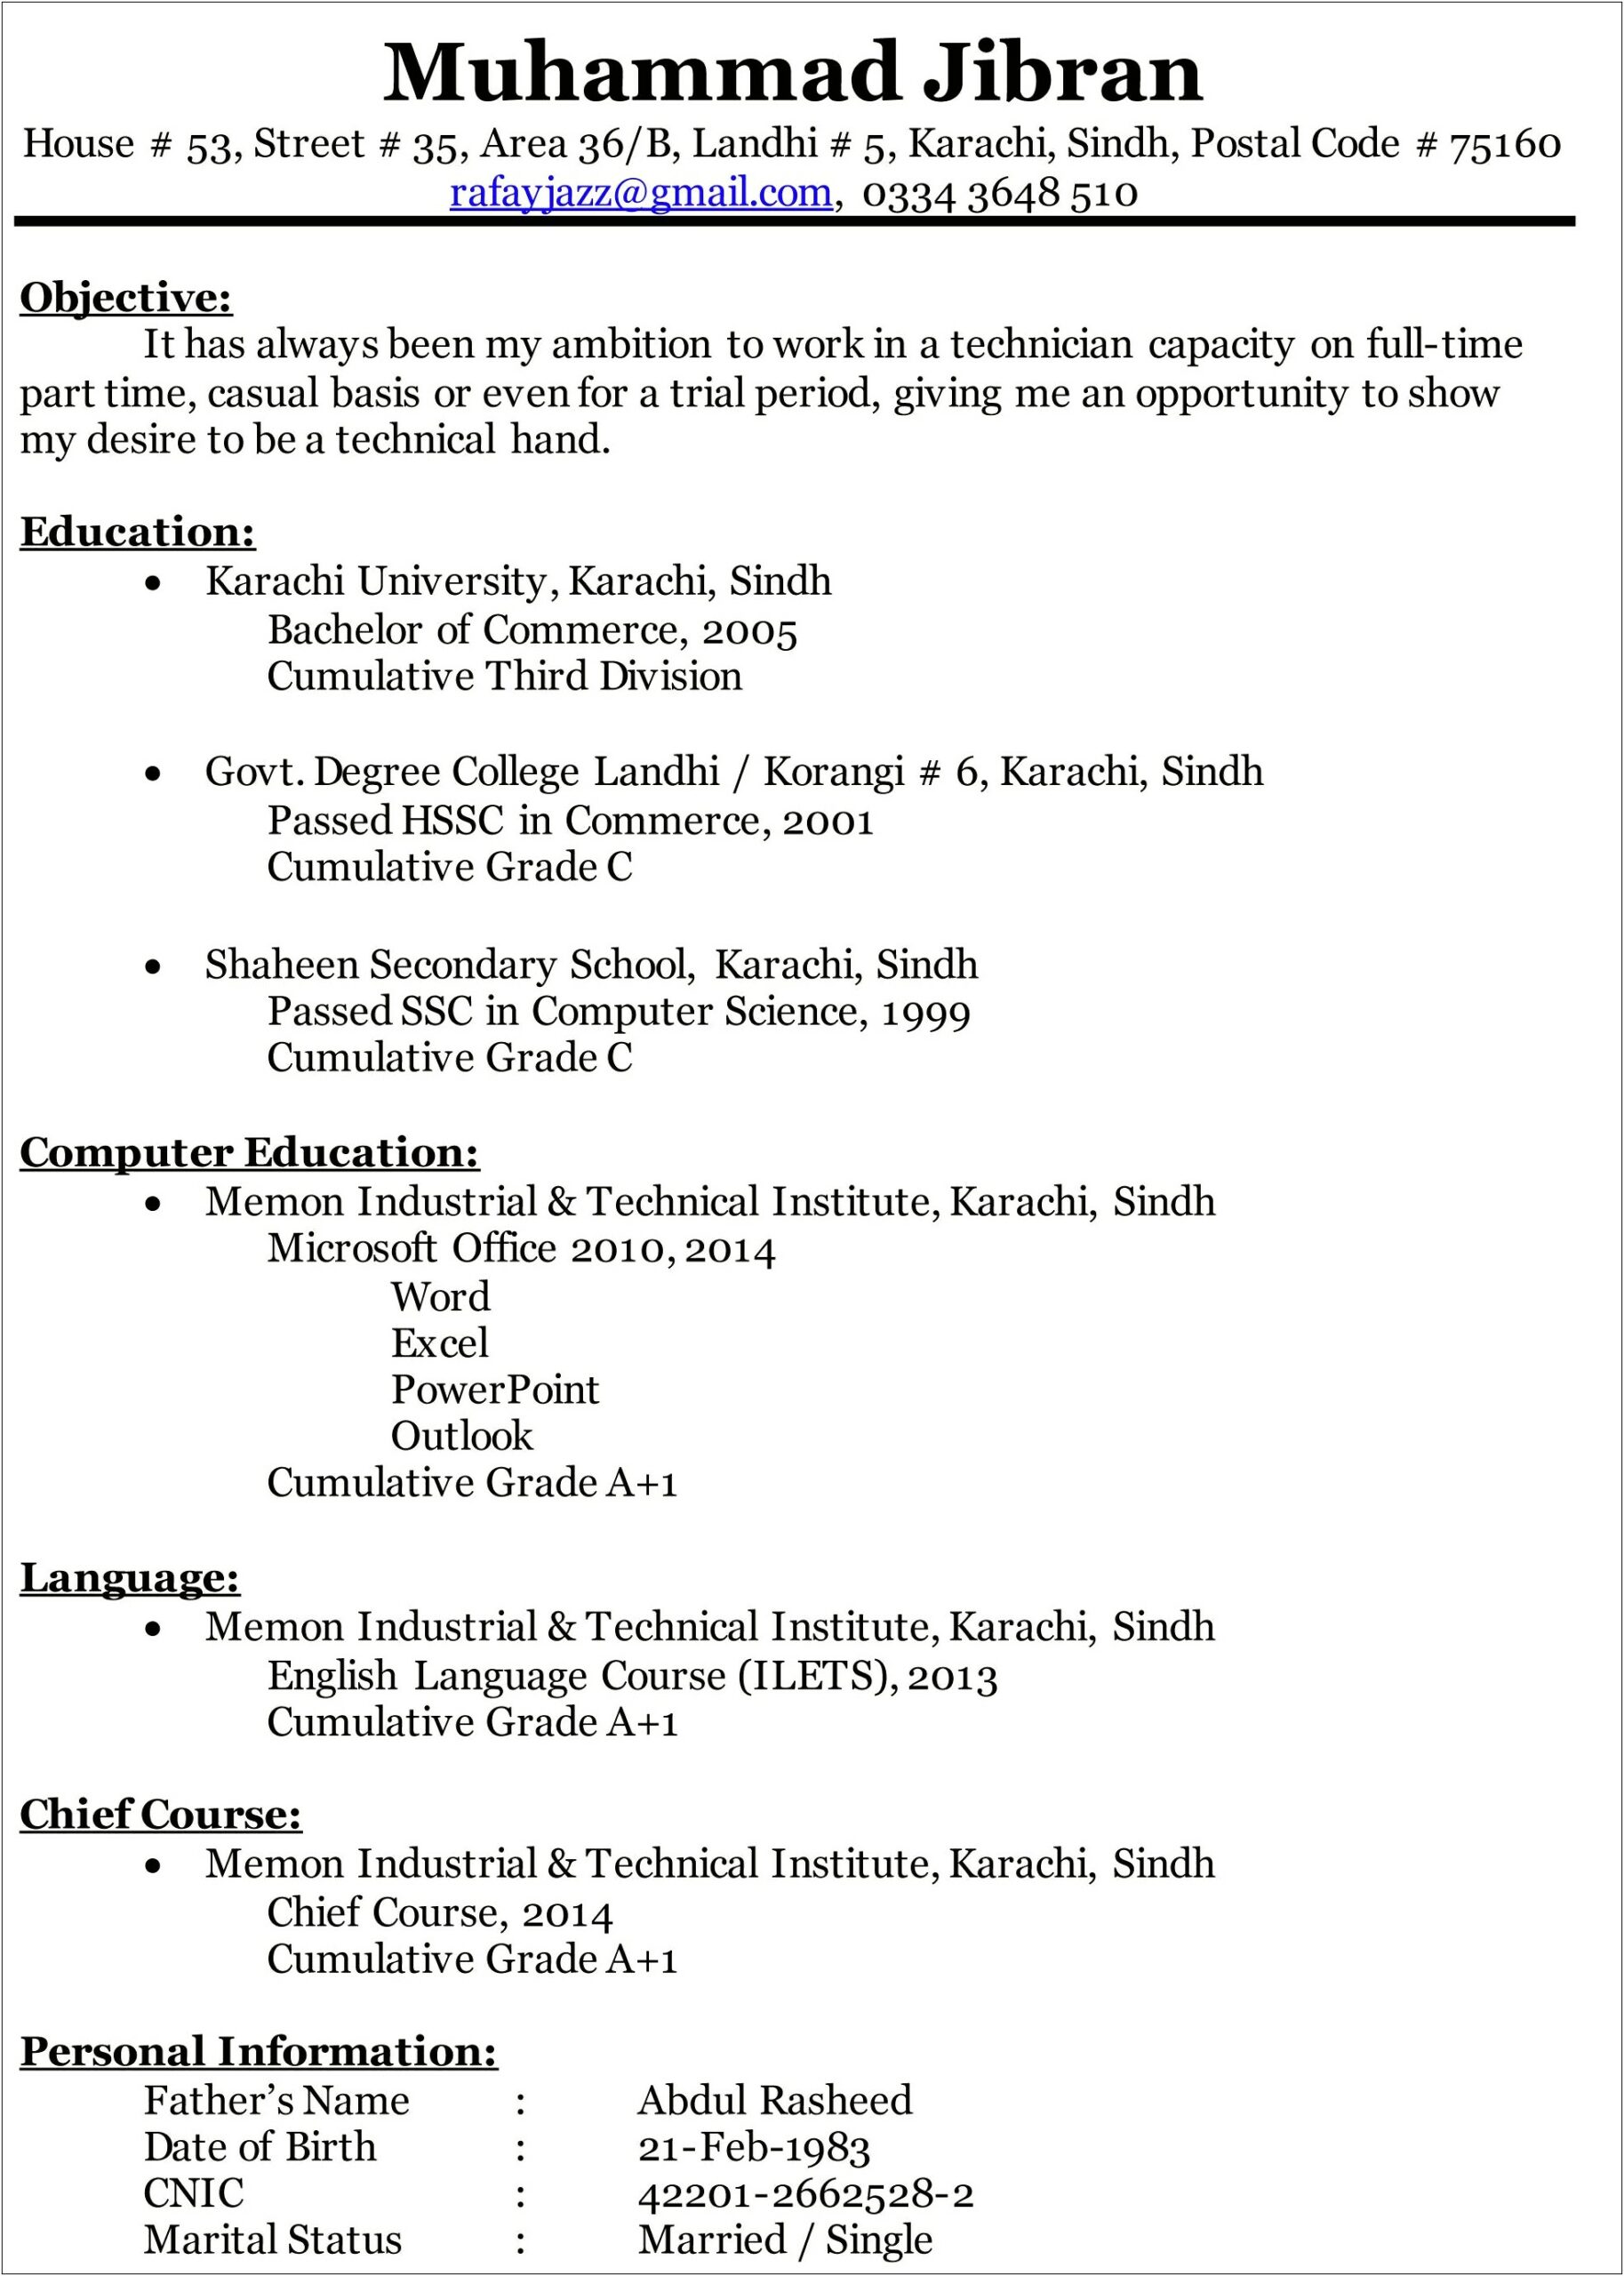 Creating A Resume In Word 2013